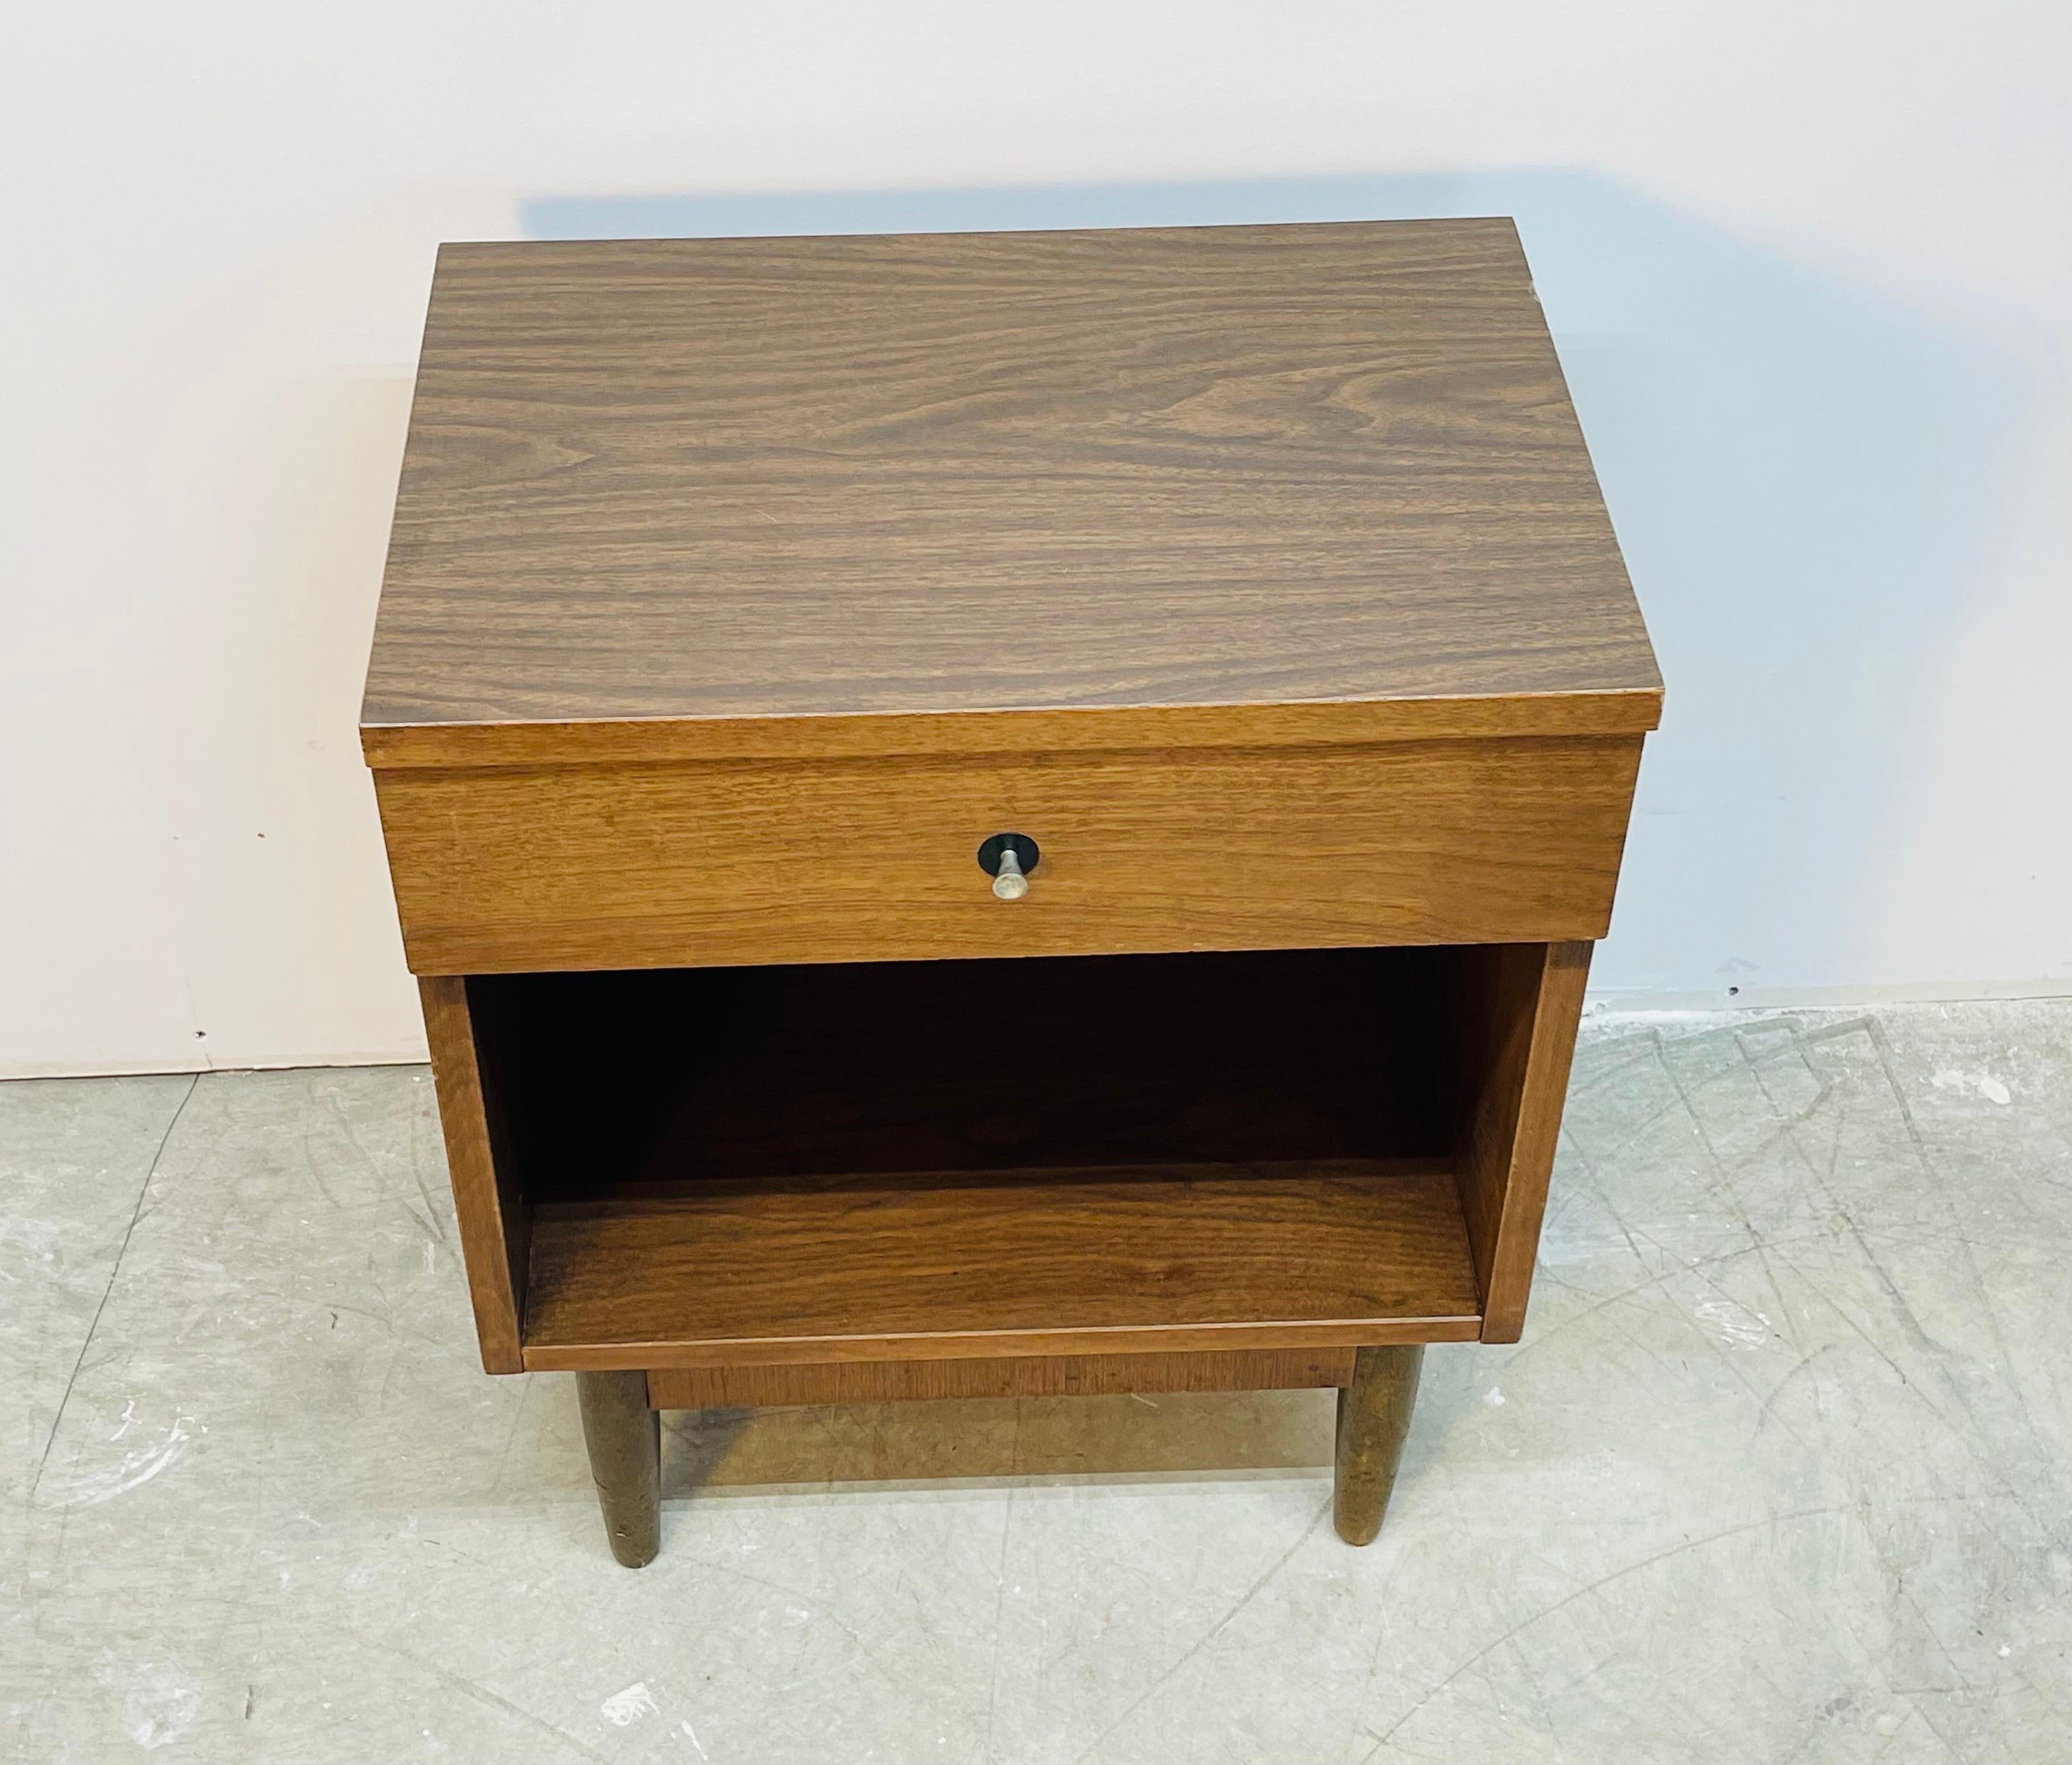 Vintage 1960s walnut wood and laminate top nightstand. The nightstand has a single drawer for storage. There is also open space for additional storage. No marks.